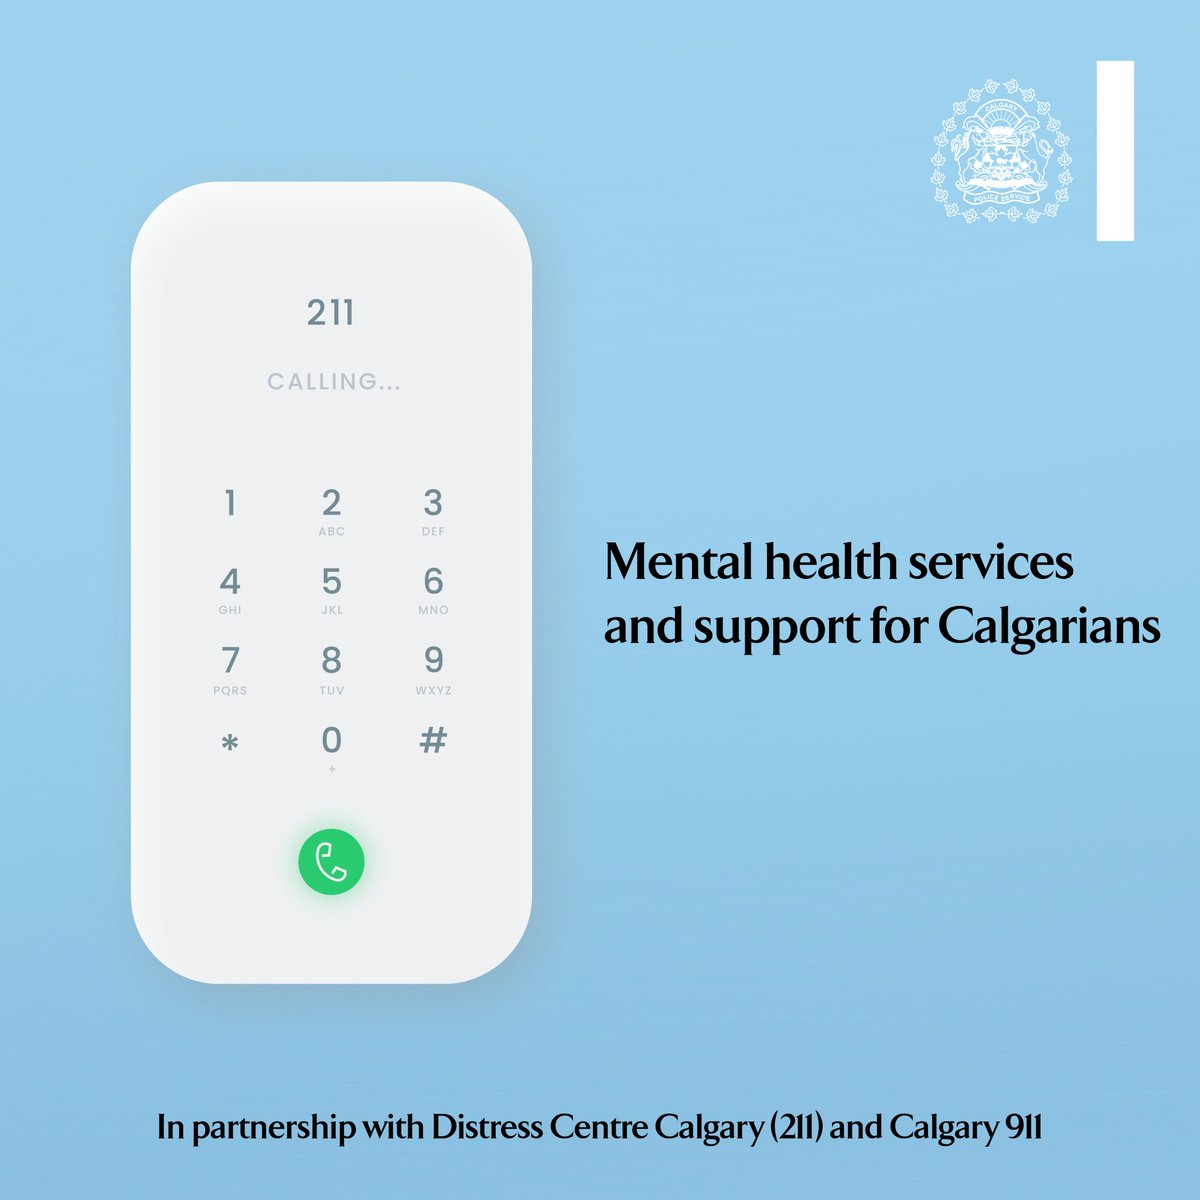 🧠 During #MentalHealthWeek we want to remind Calgarians that mental health supports are available year-round. Calling 211 for non-emergency situations ensures people will receive the right resource, at the right time. ☎️ For emergencies call 911. 🤝@Distress_Centre, @211calgary…